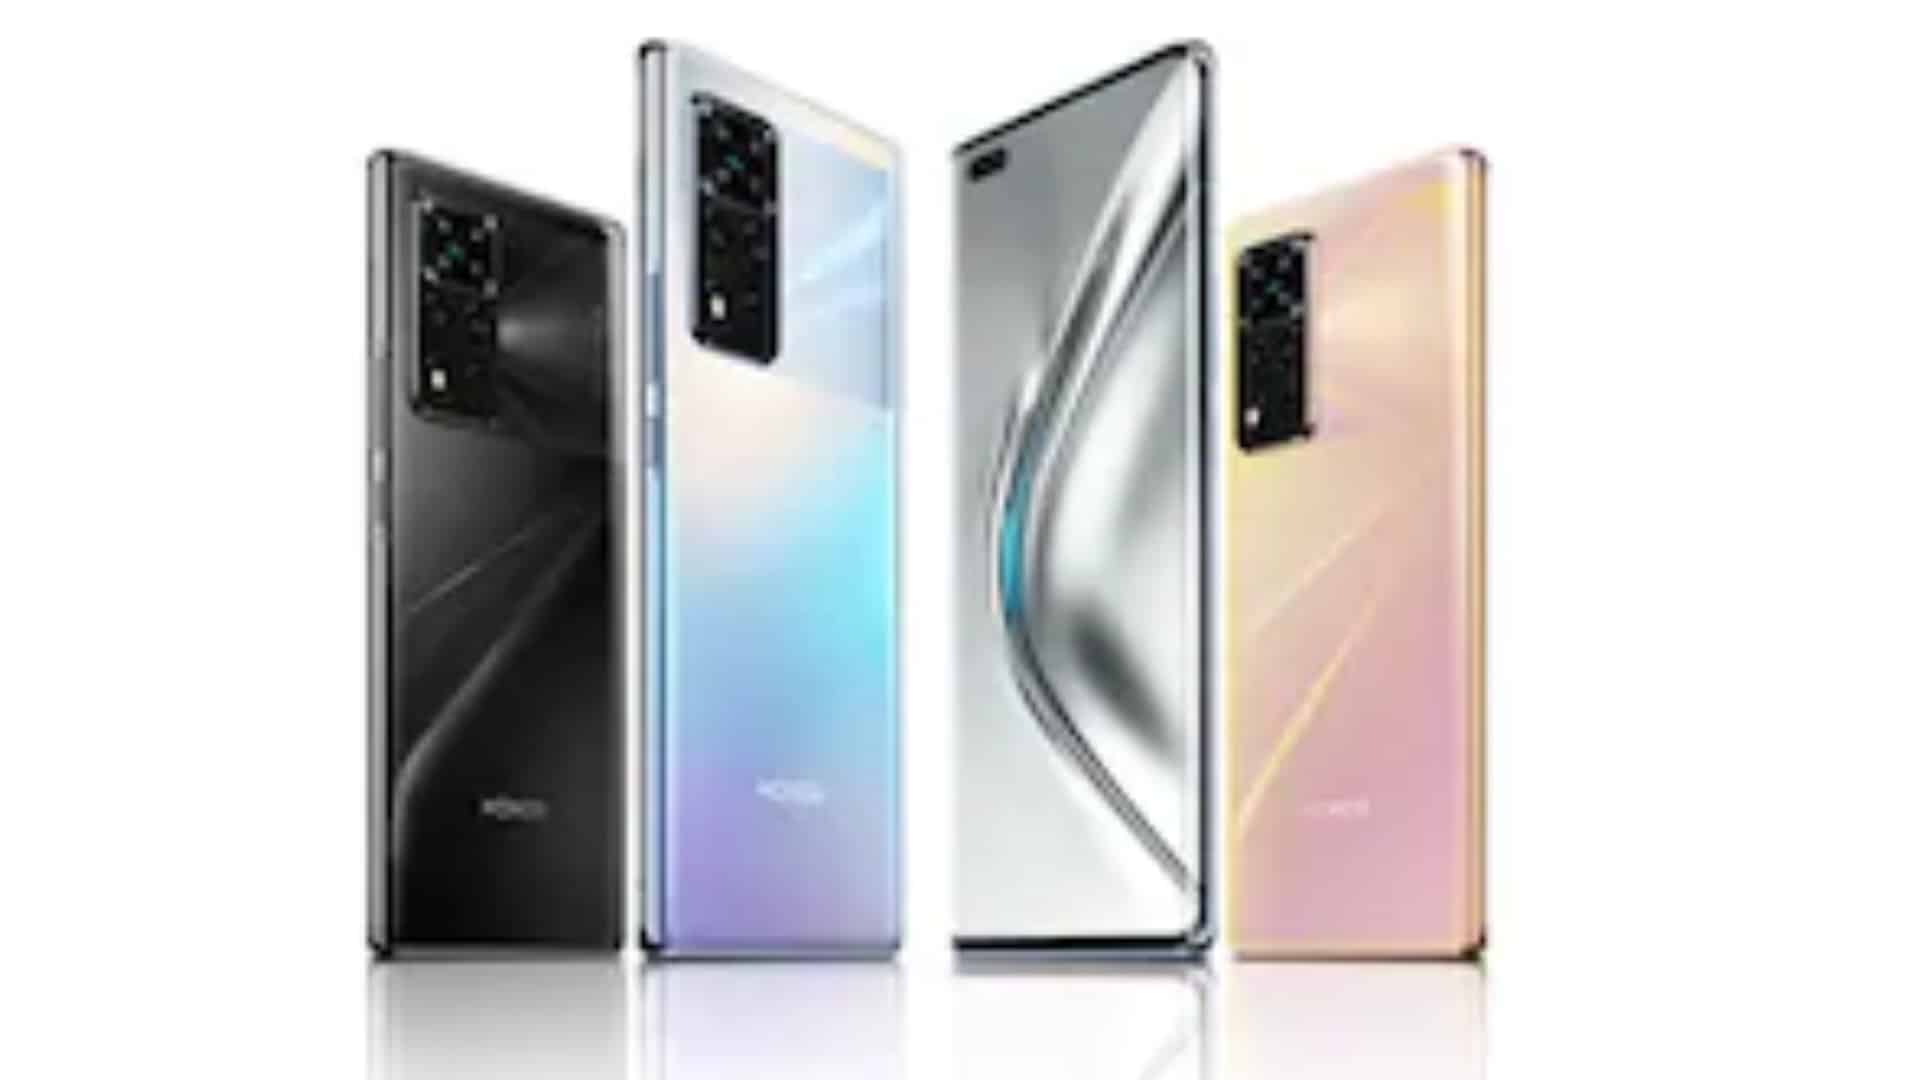 Honor V40 Launched in China With Dimensity 1000+ SoC, Dual Selfie Cameras: Check Specs, Price, and More